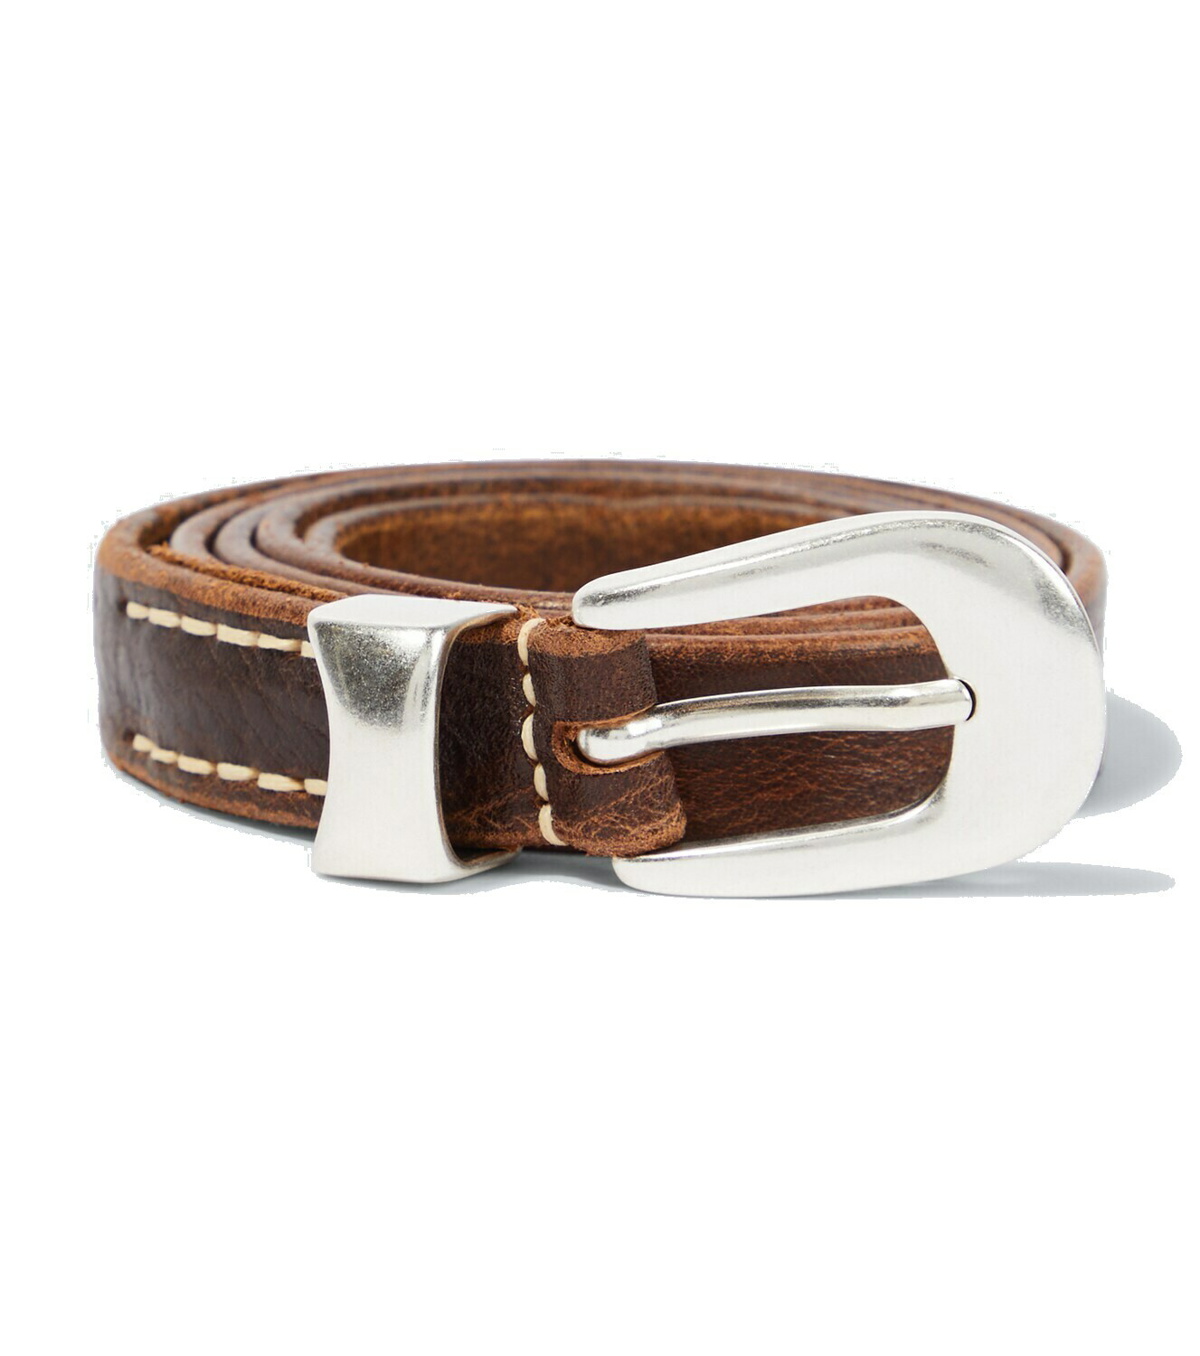 Our Legacy Leather belt Our Legacy